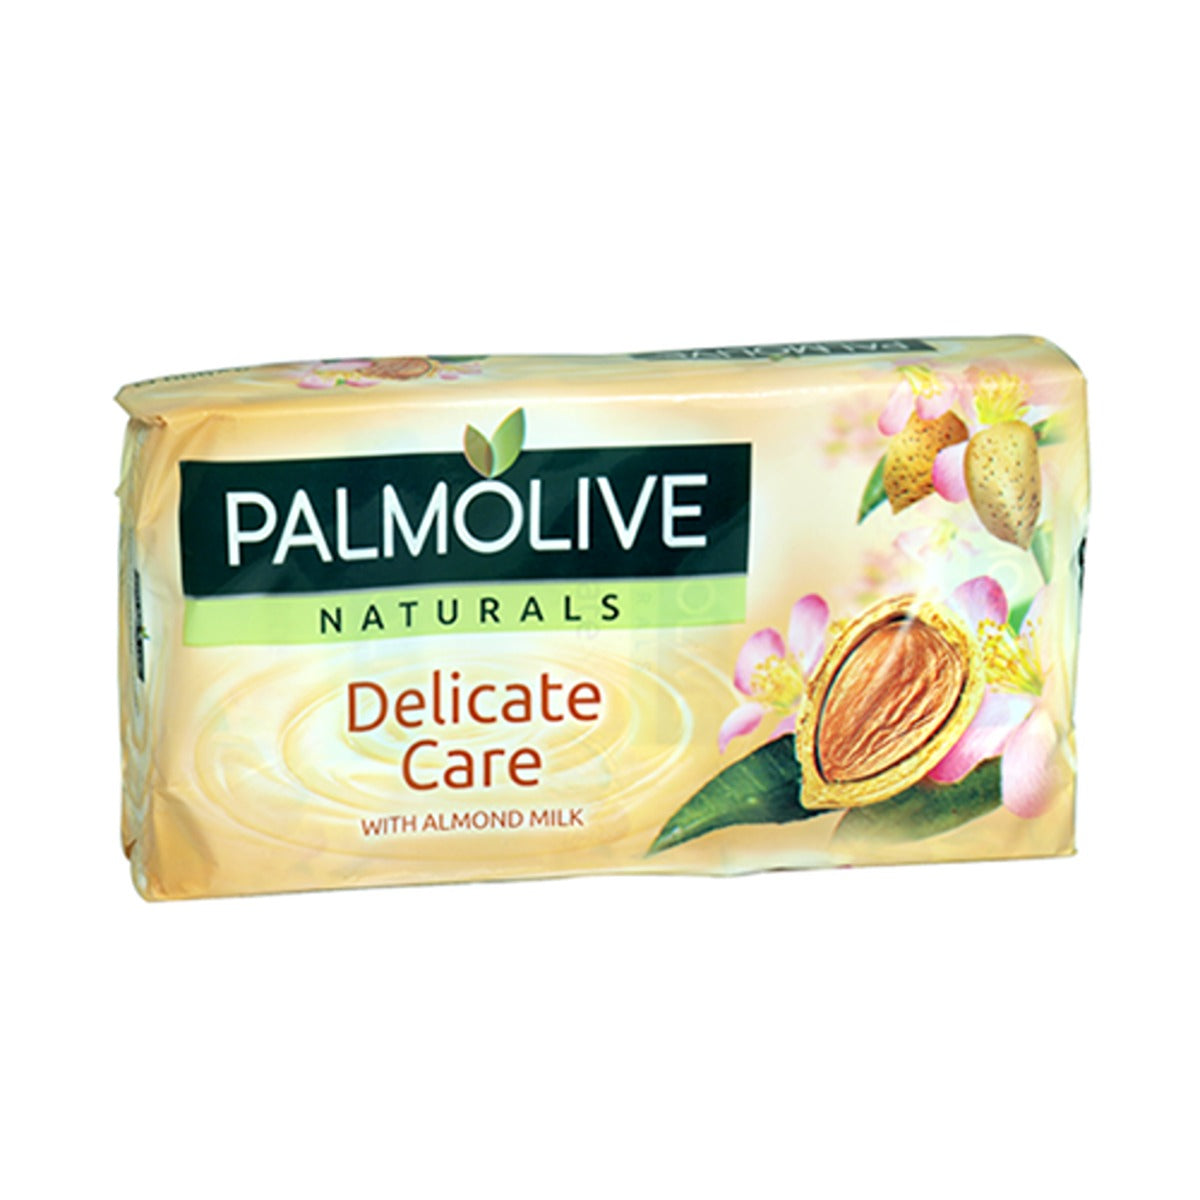 Palmolive - Delicate Care Soap 90g - Continental Food Store